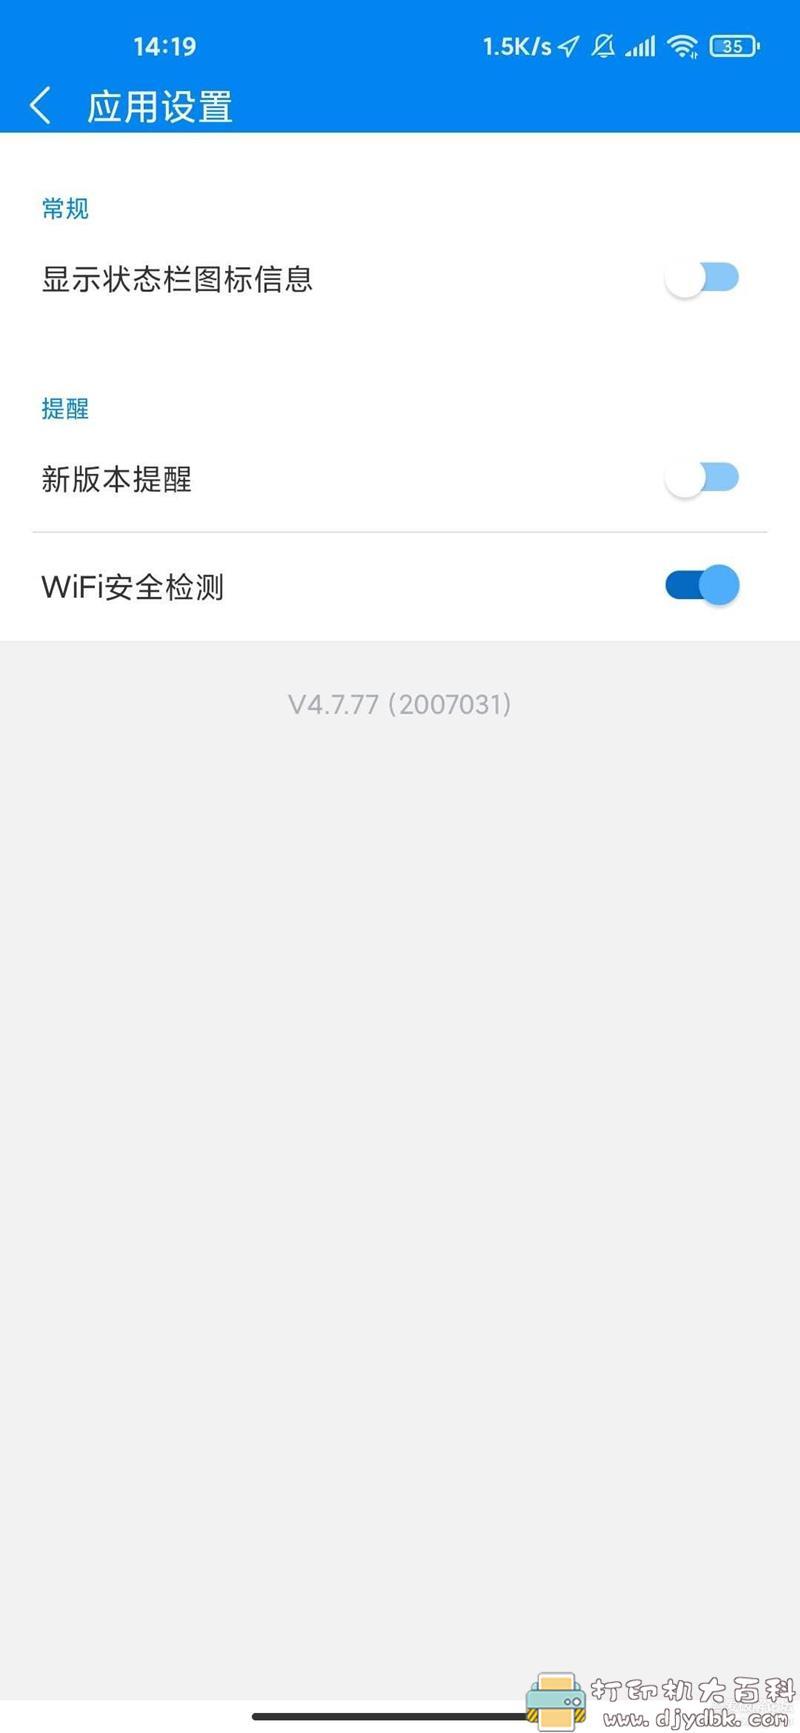 [Android]WIFI大师 v4.7.77.0 for Google Play 无广告版 配图 No.2